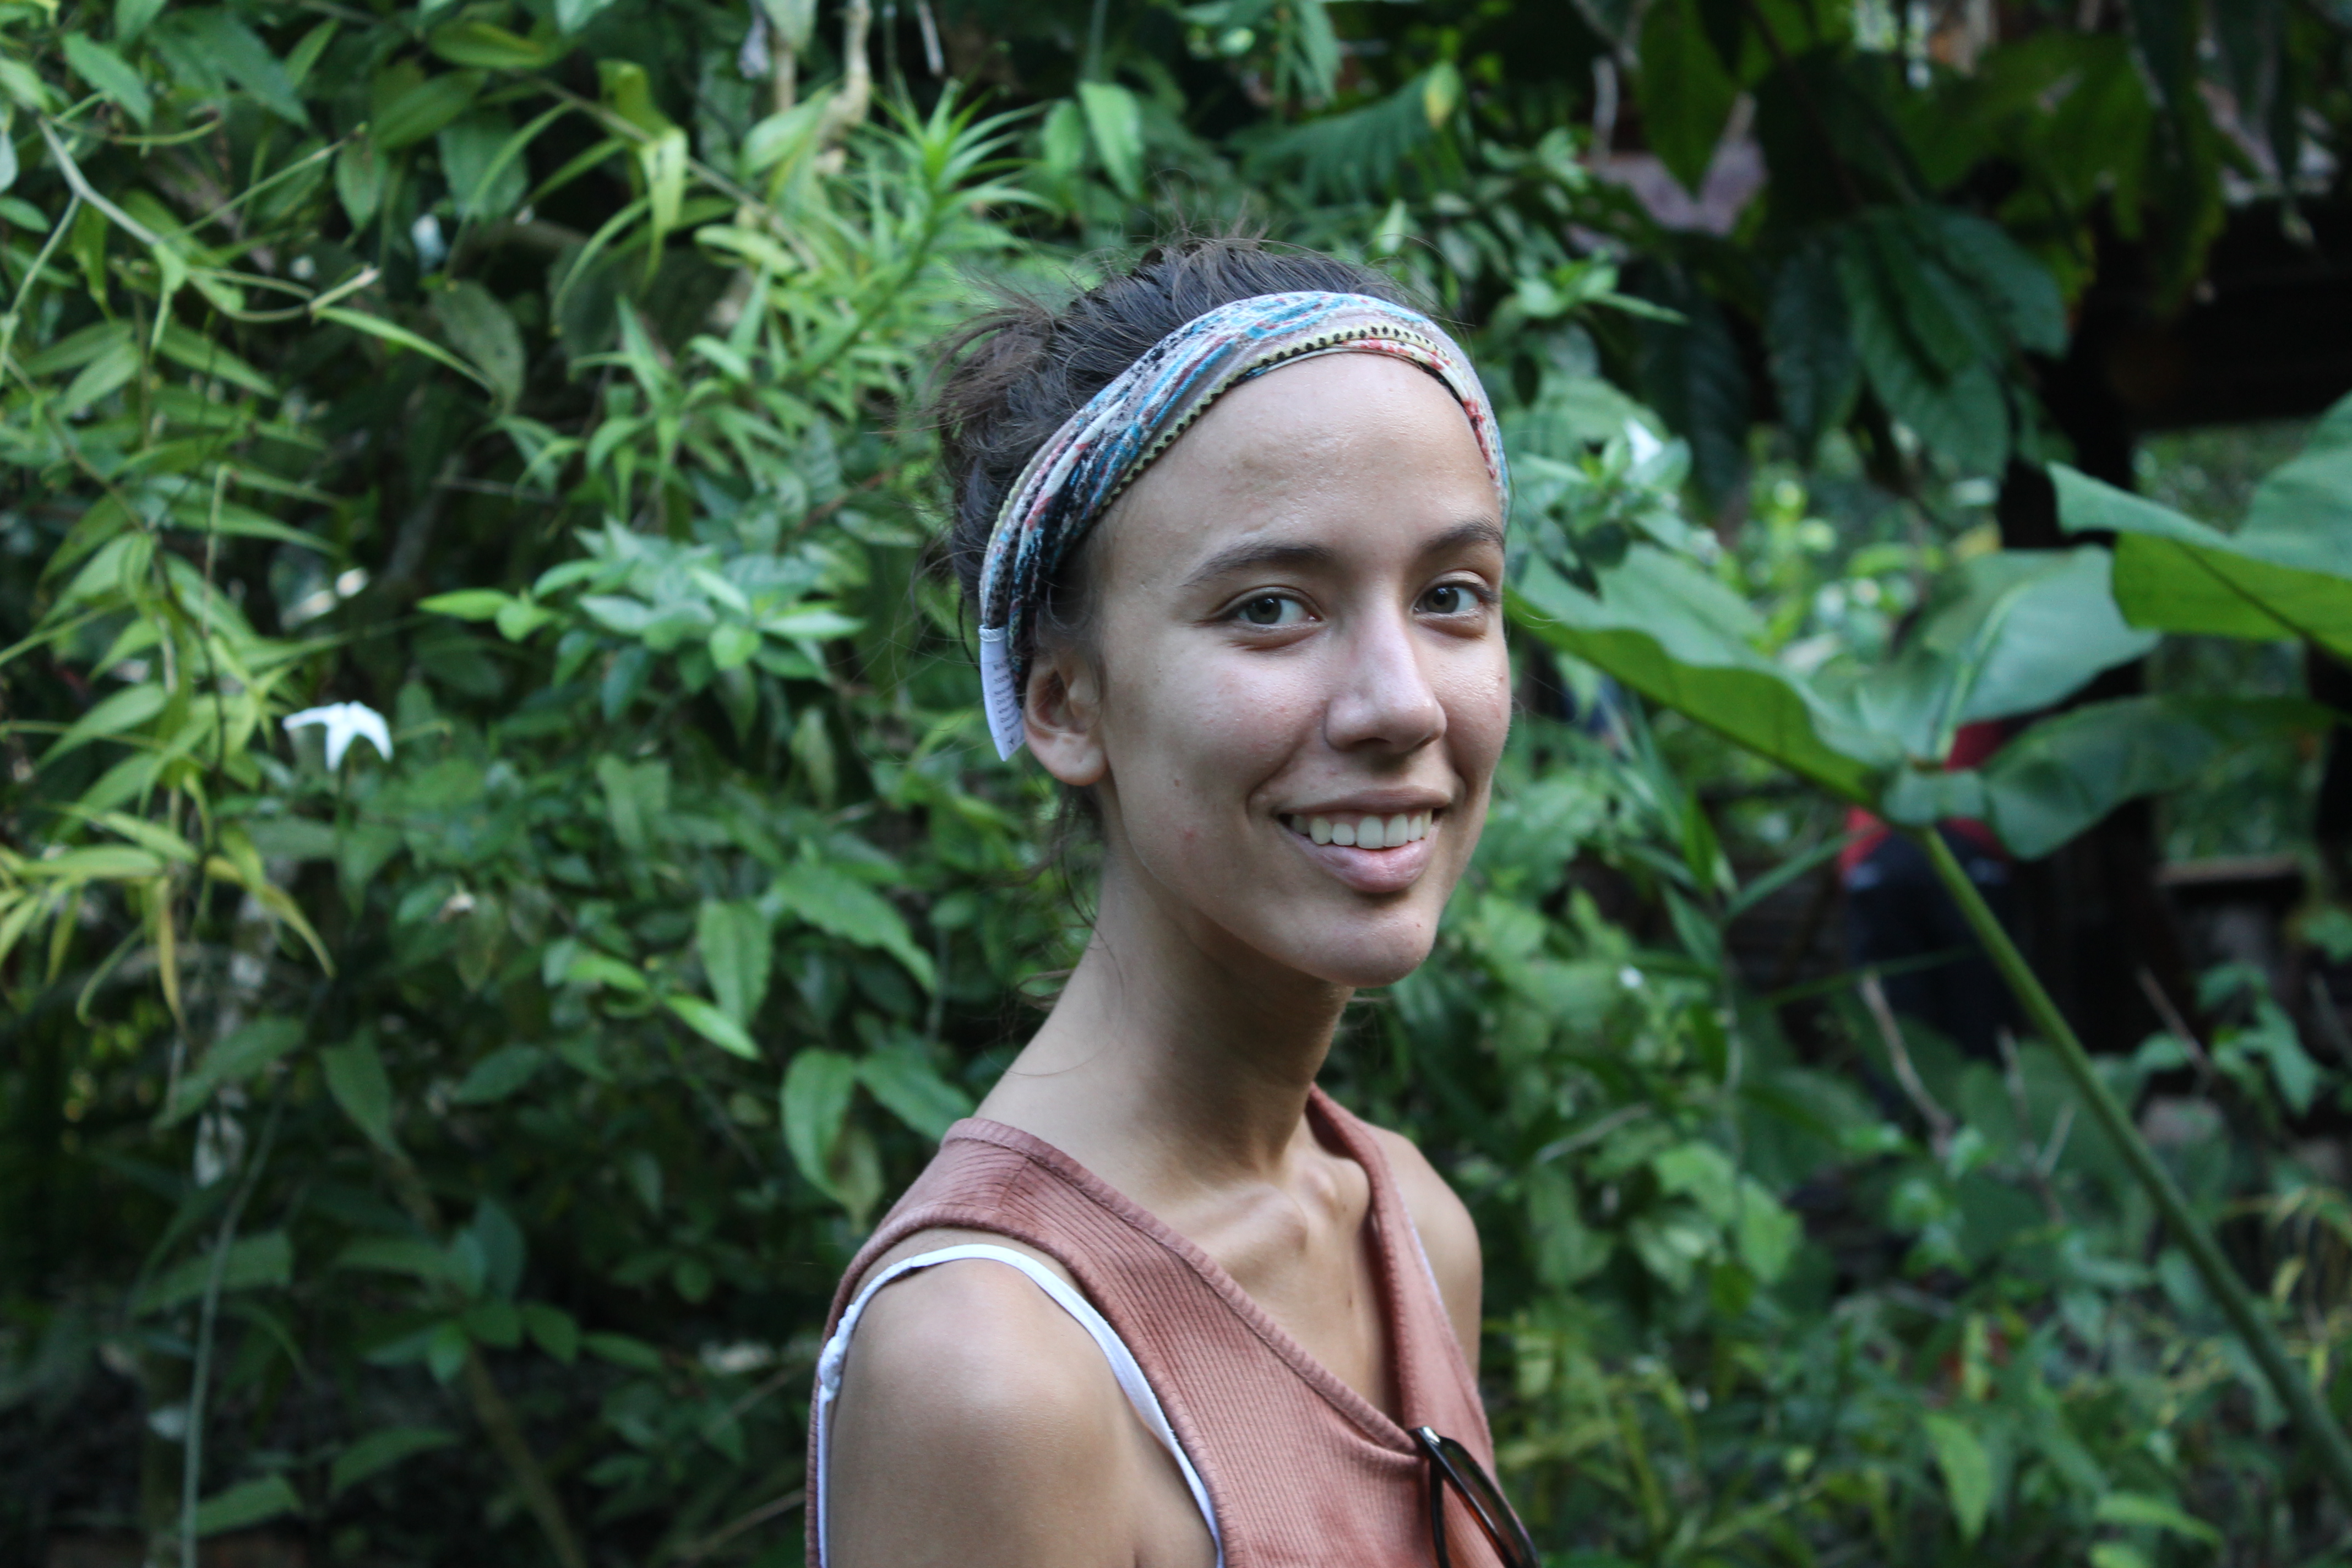 Robinson Scholar learns life experience in Costa Rica